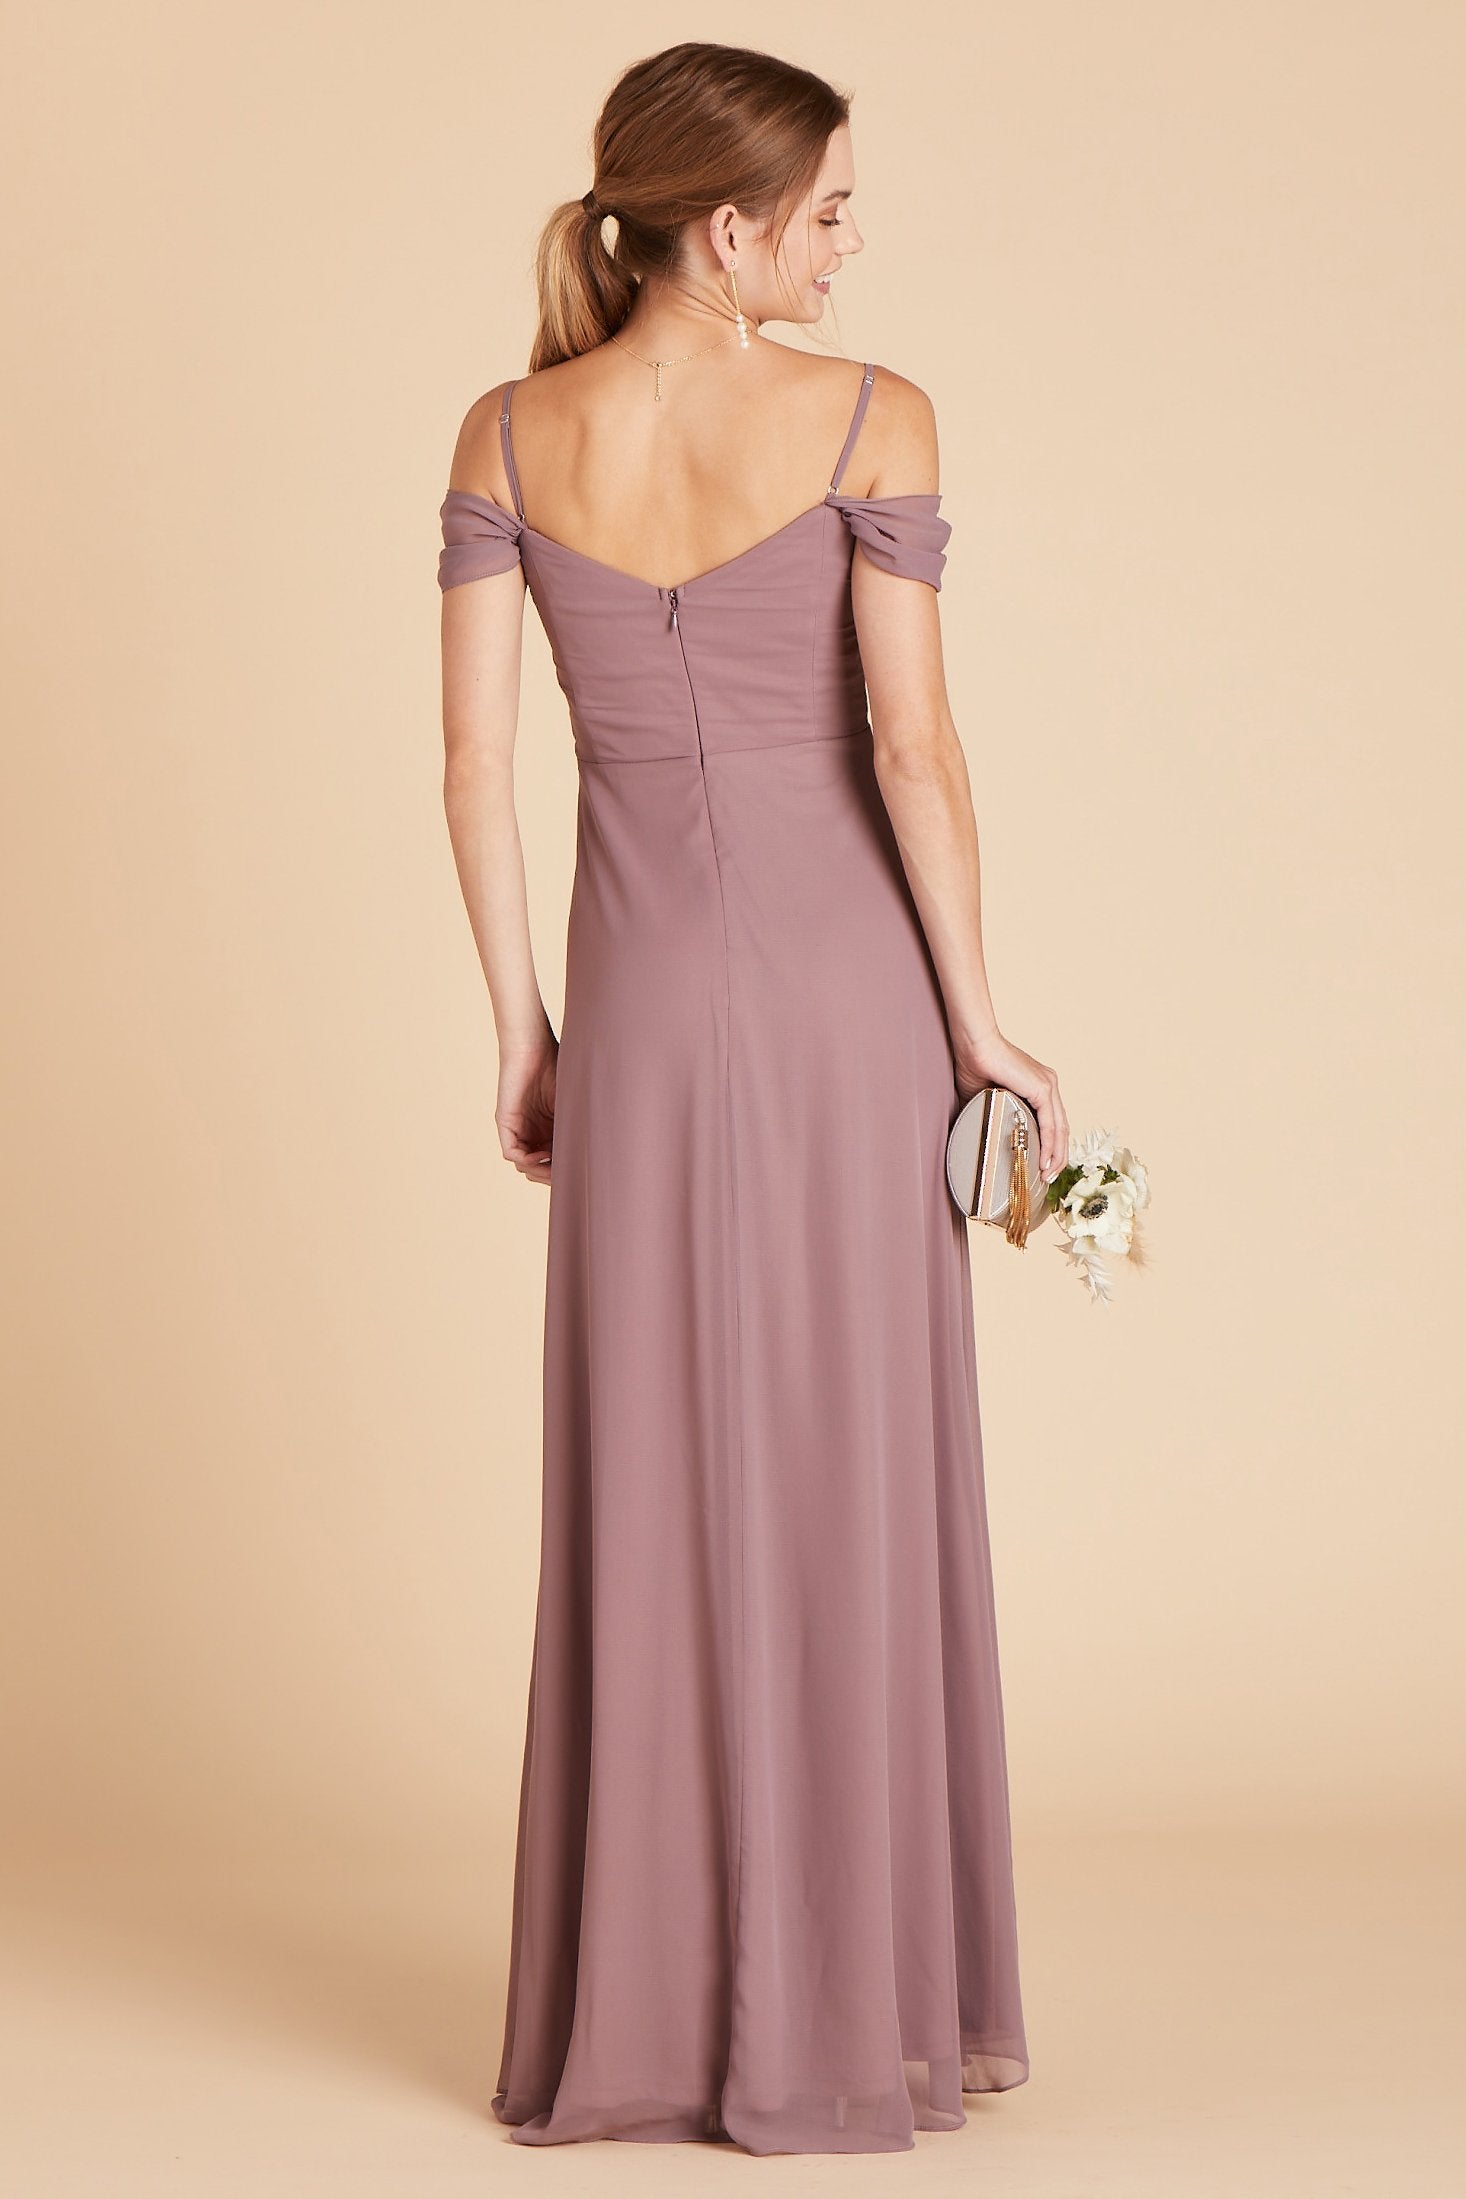 Spence convertible bridesmaid dress in dark mauve chiffon by Birdy Grey, back view